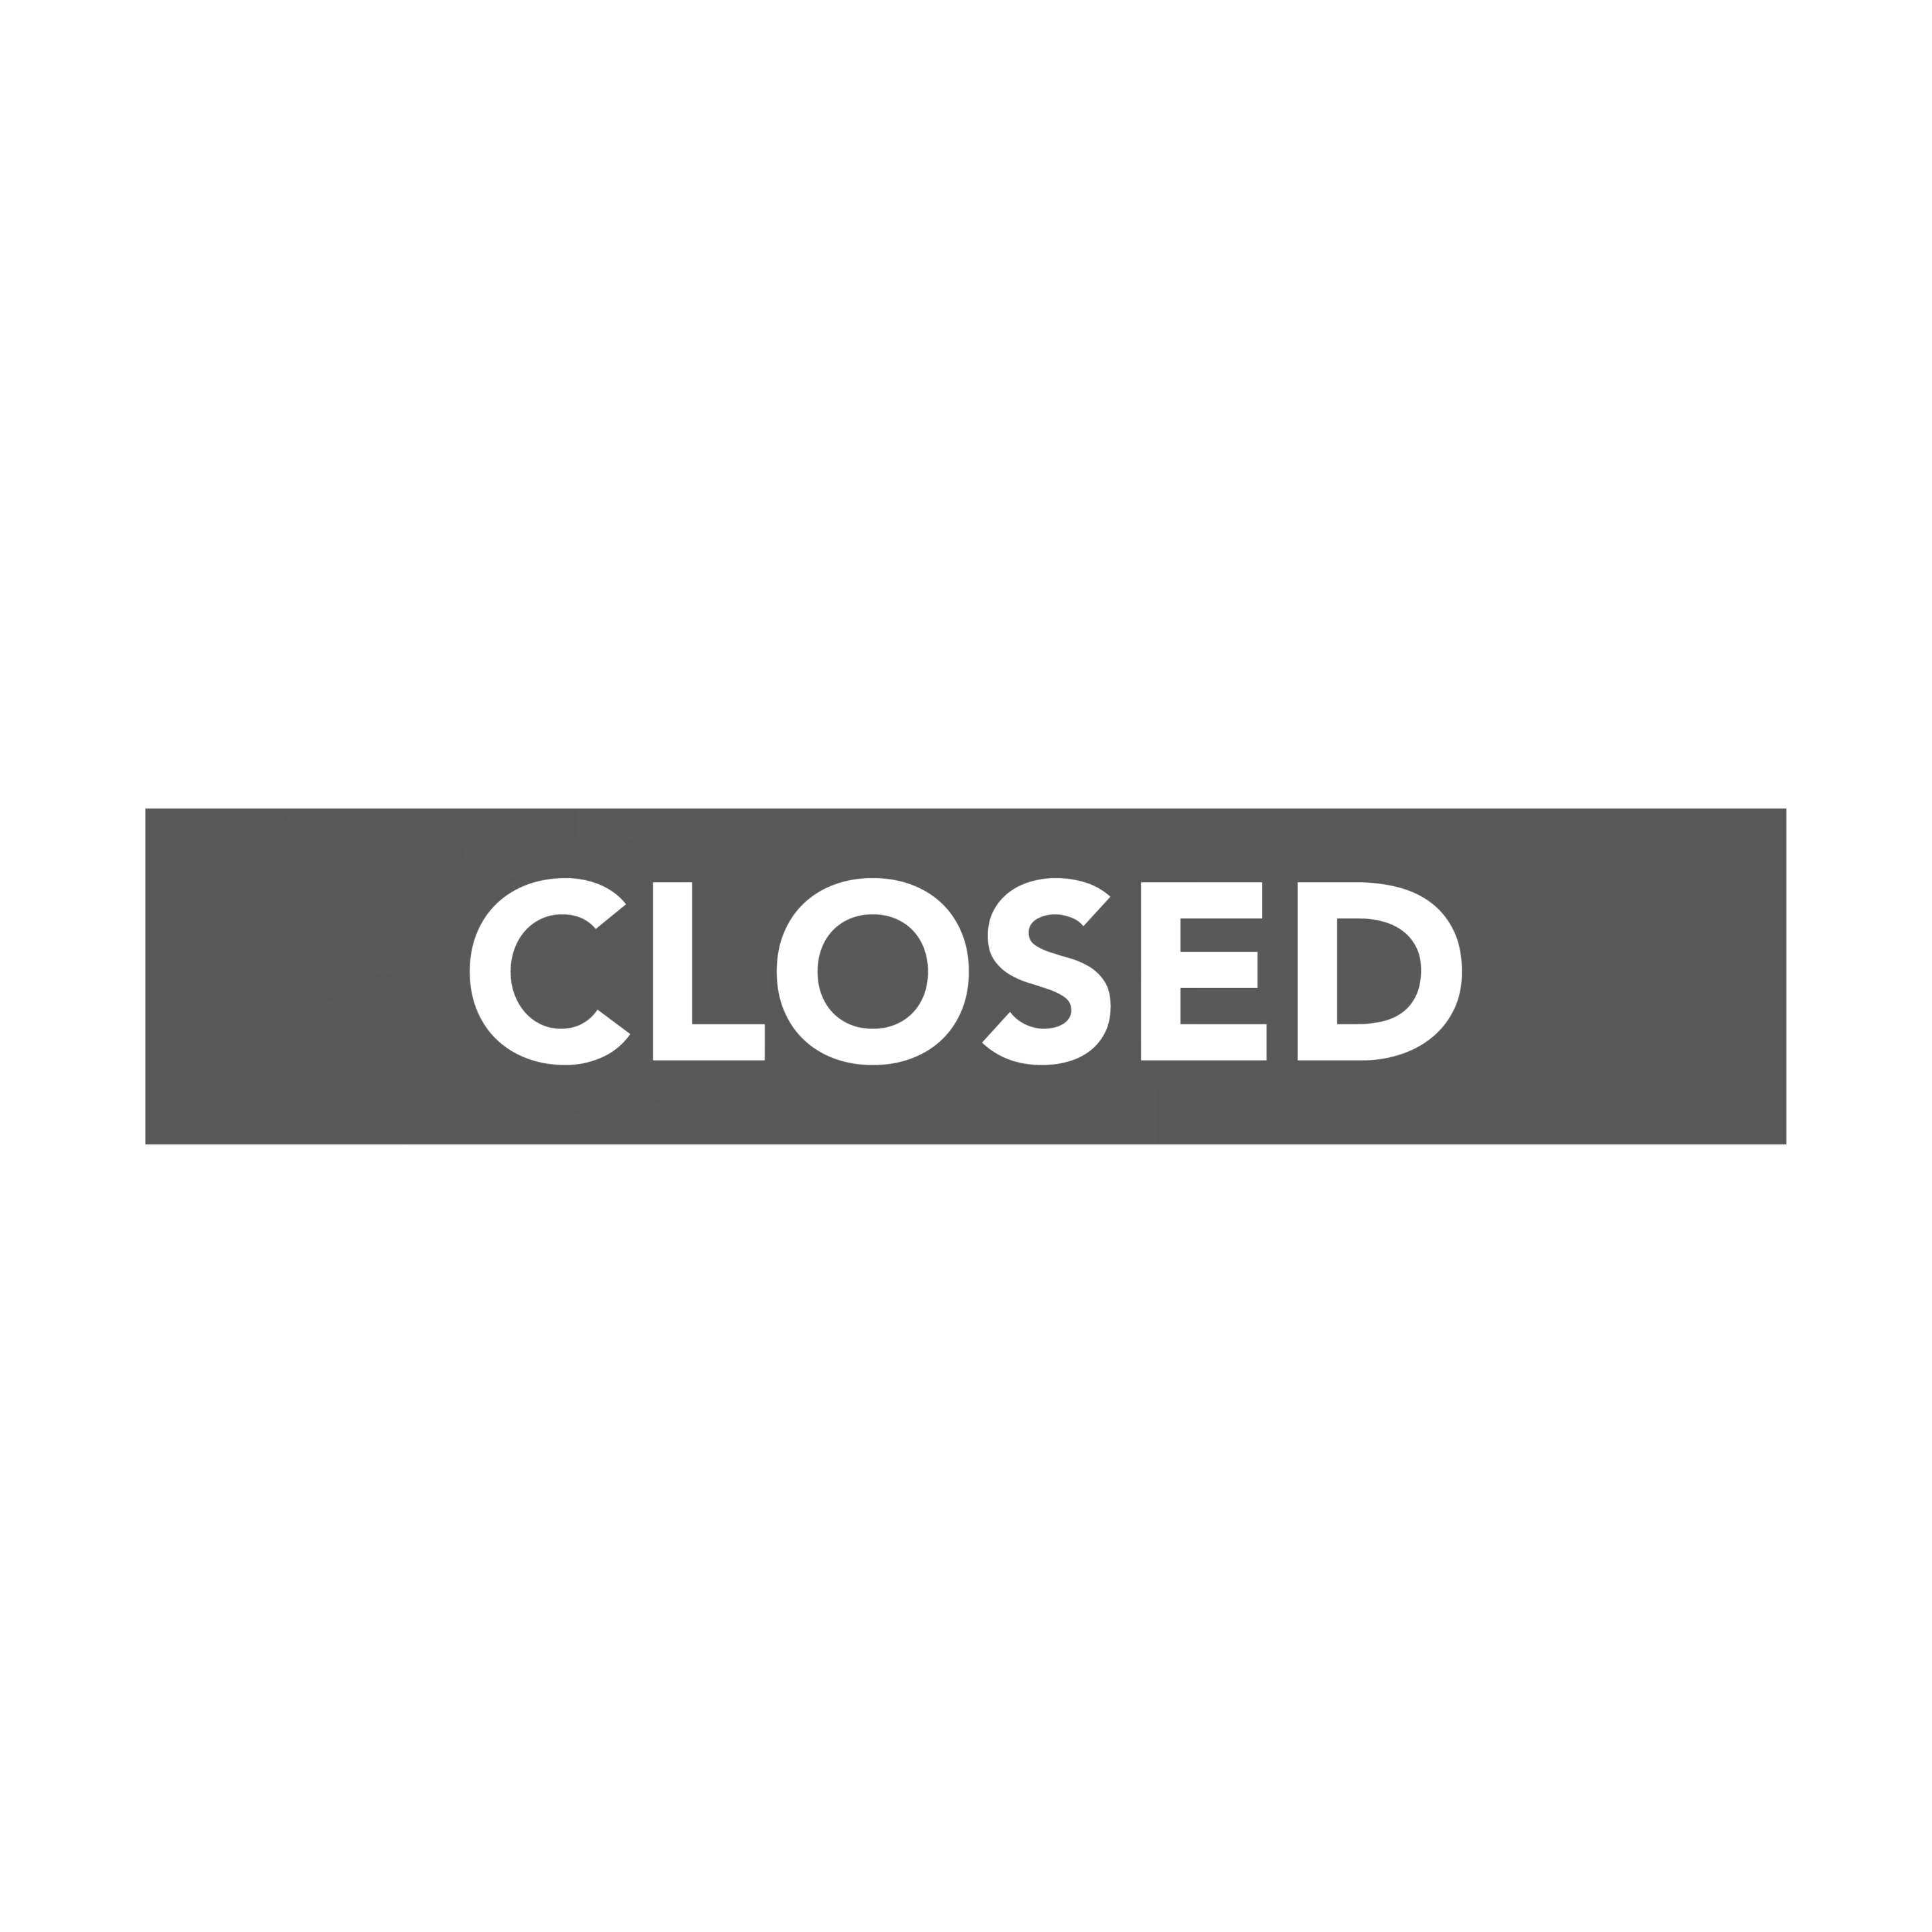 Utah State University logo with "closed" banner representing that entries are closed